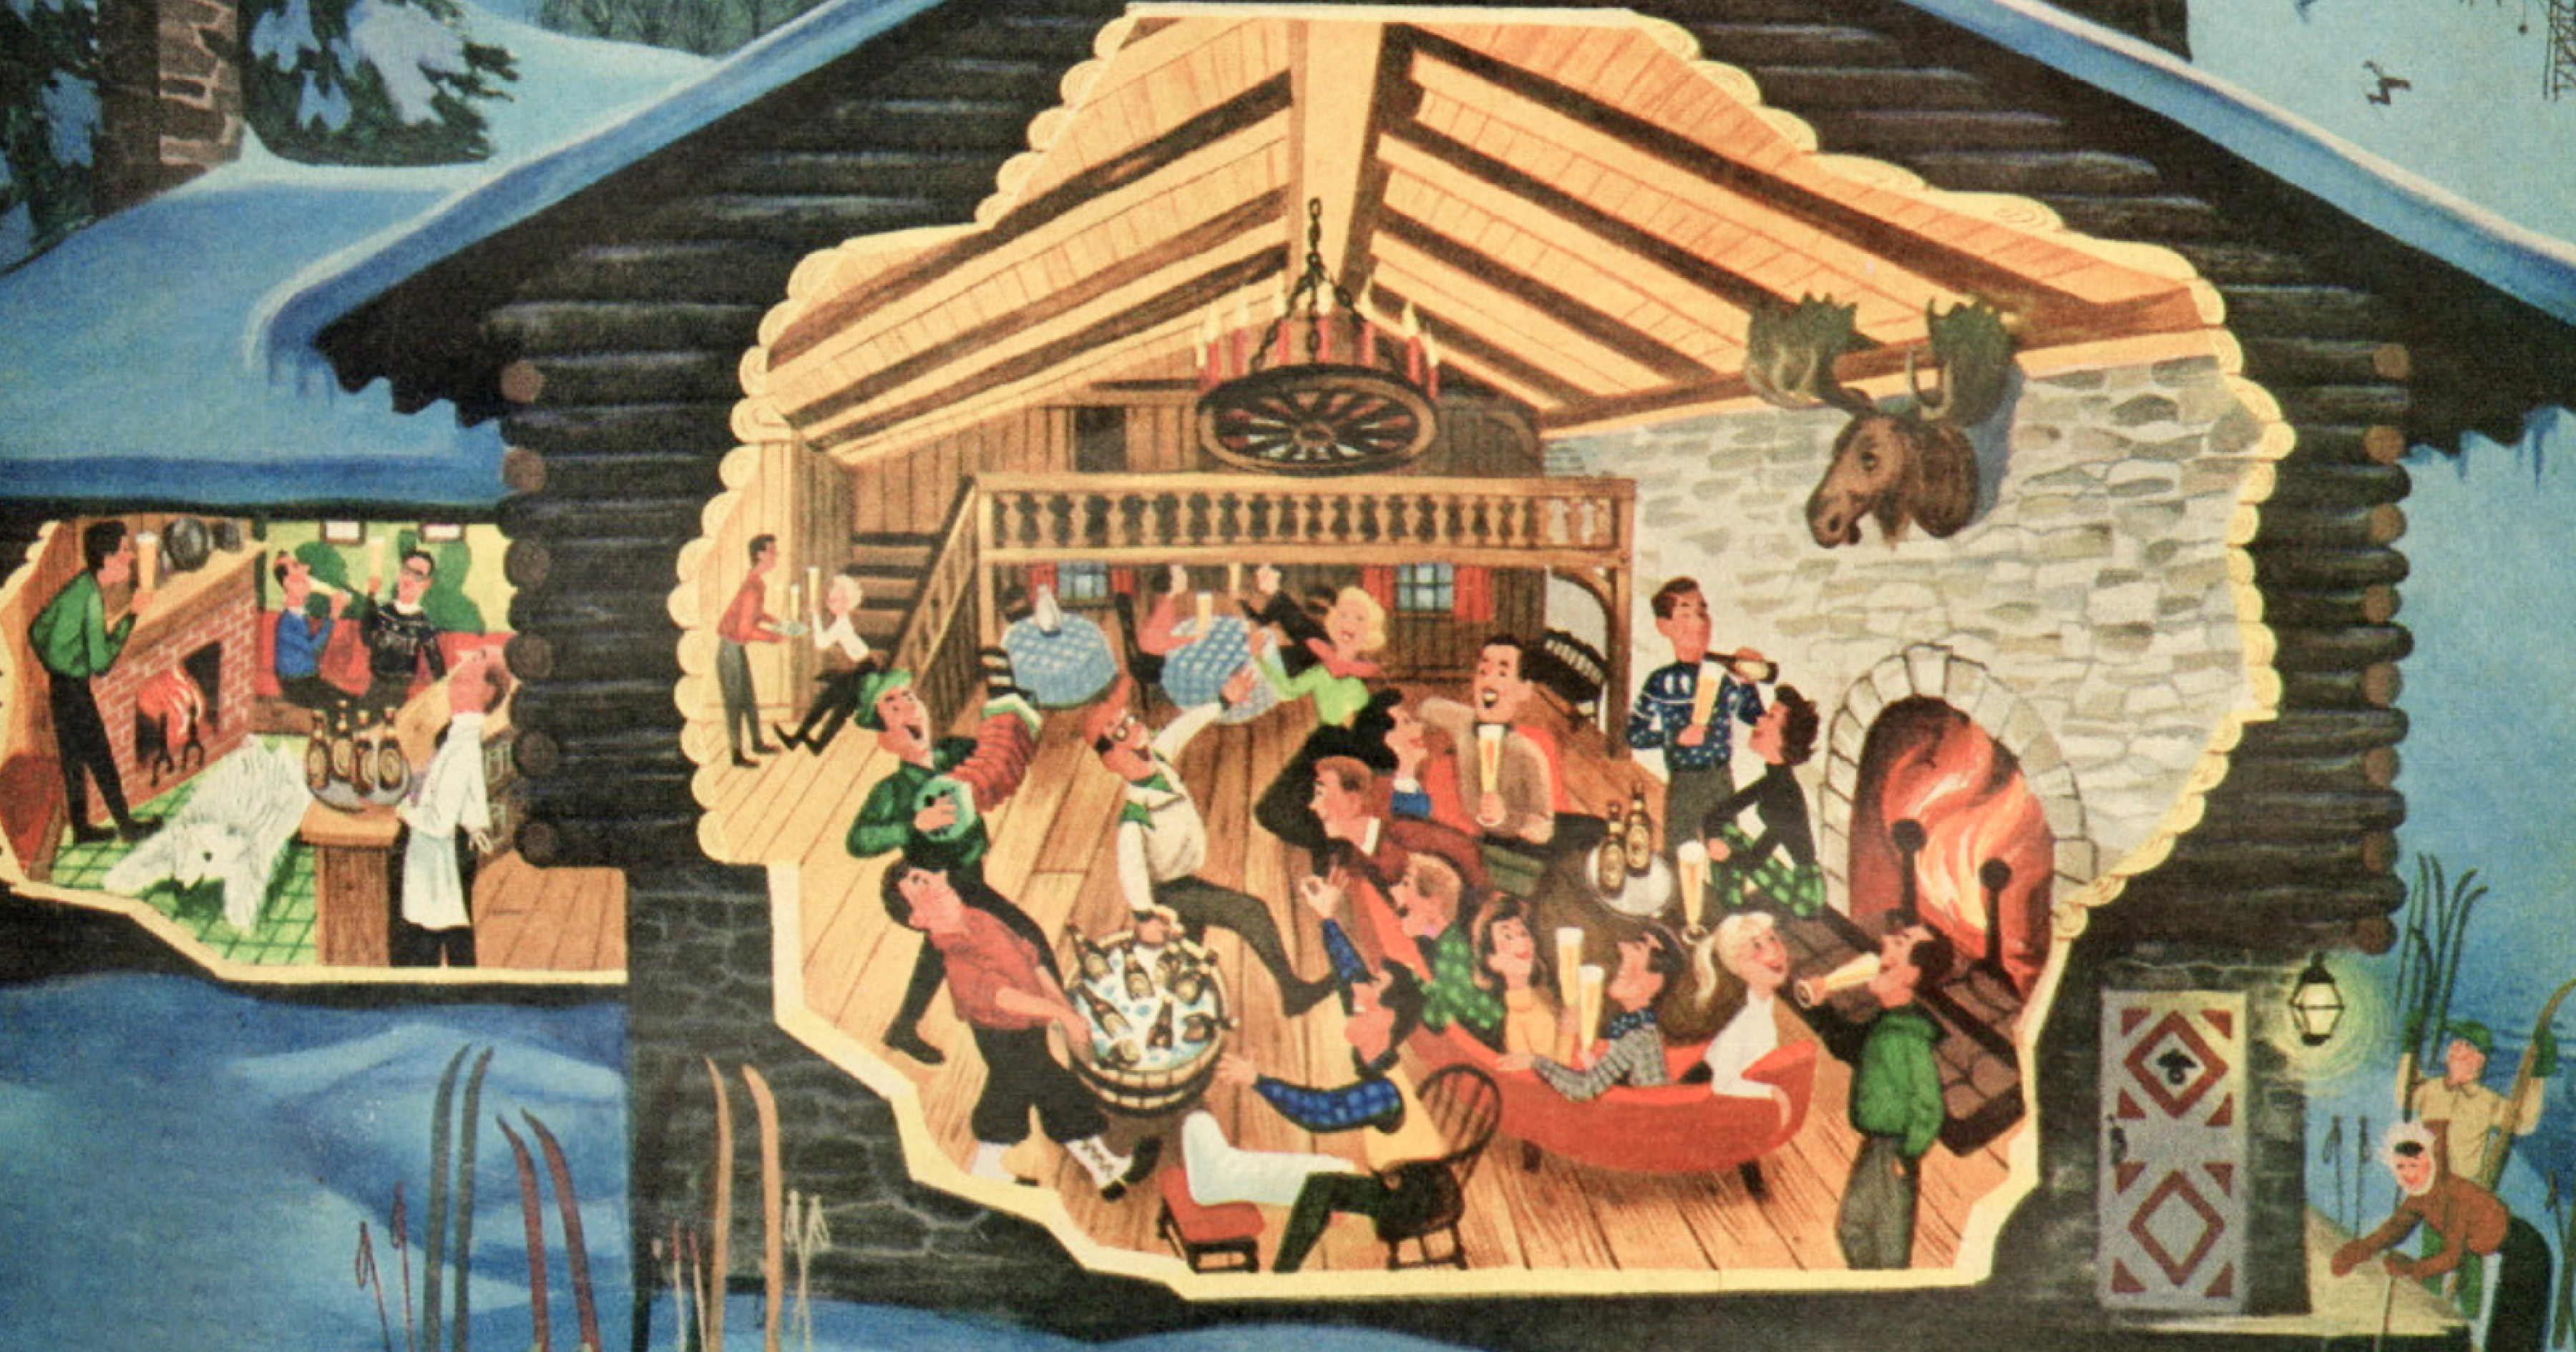 People in a winter lodge socializing and laughing